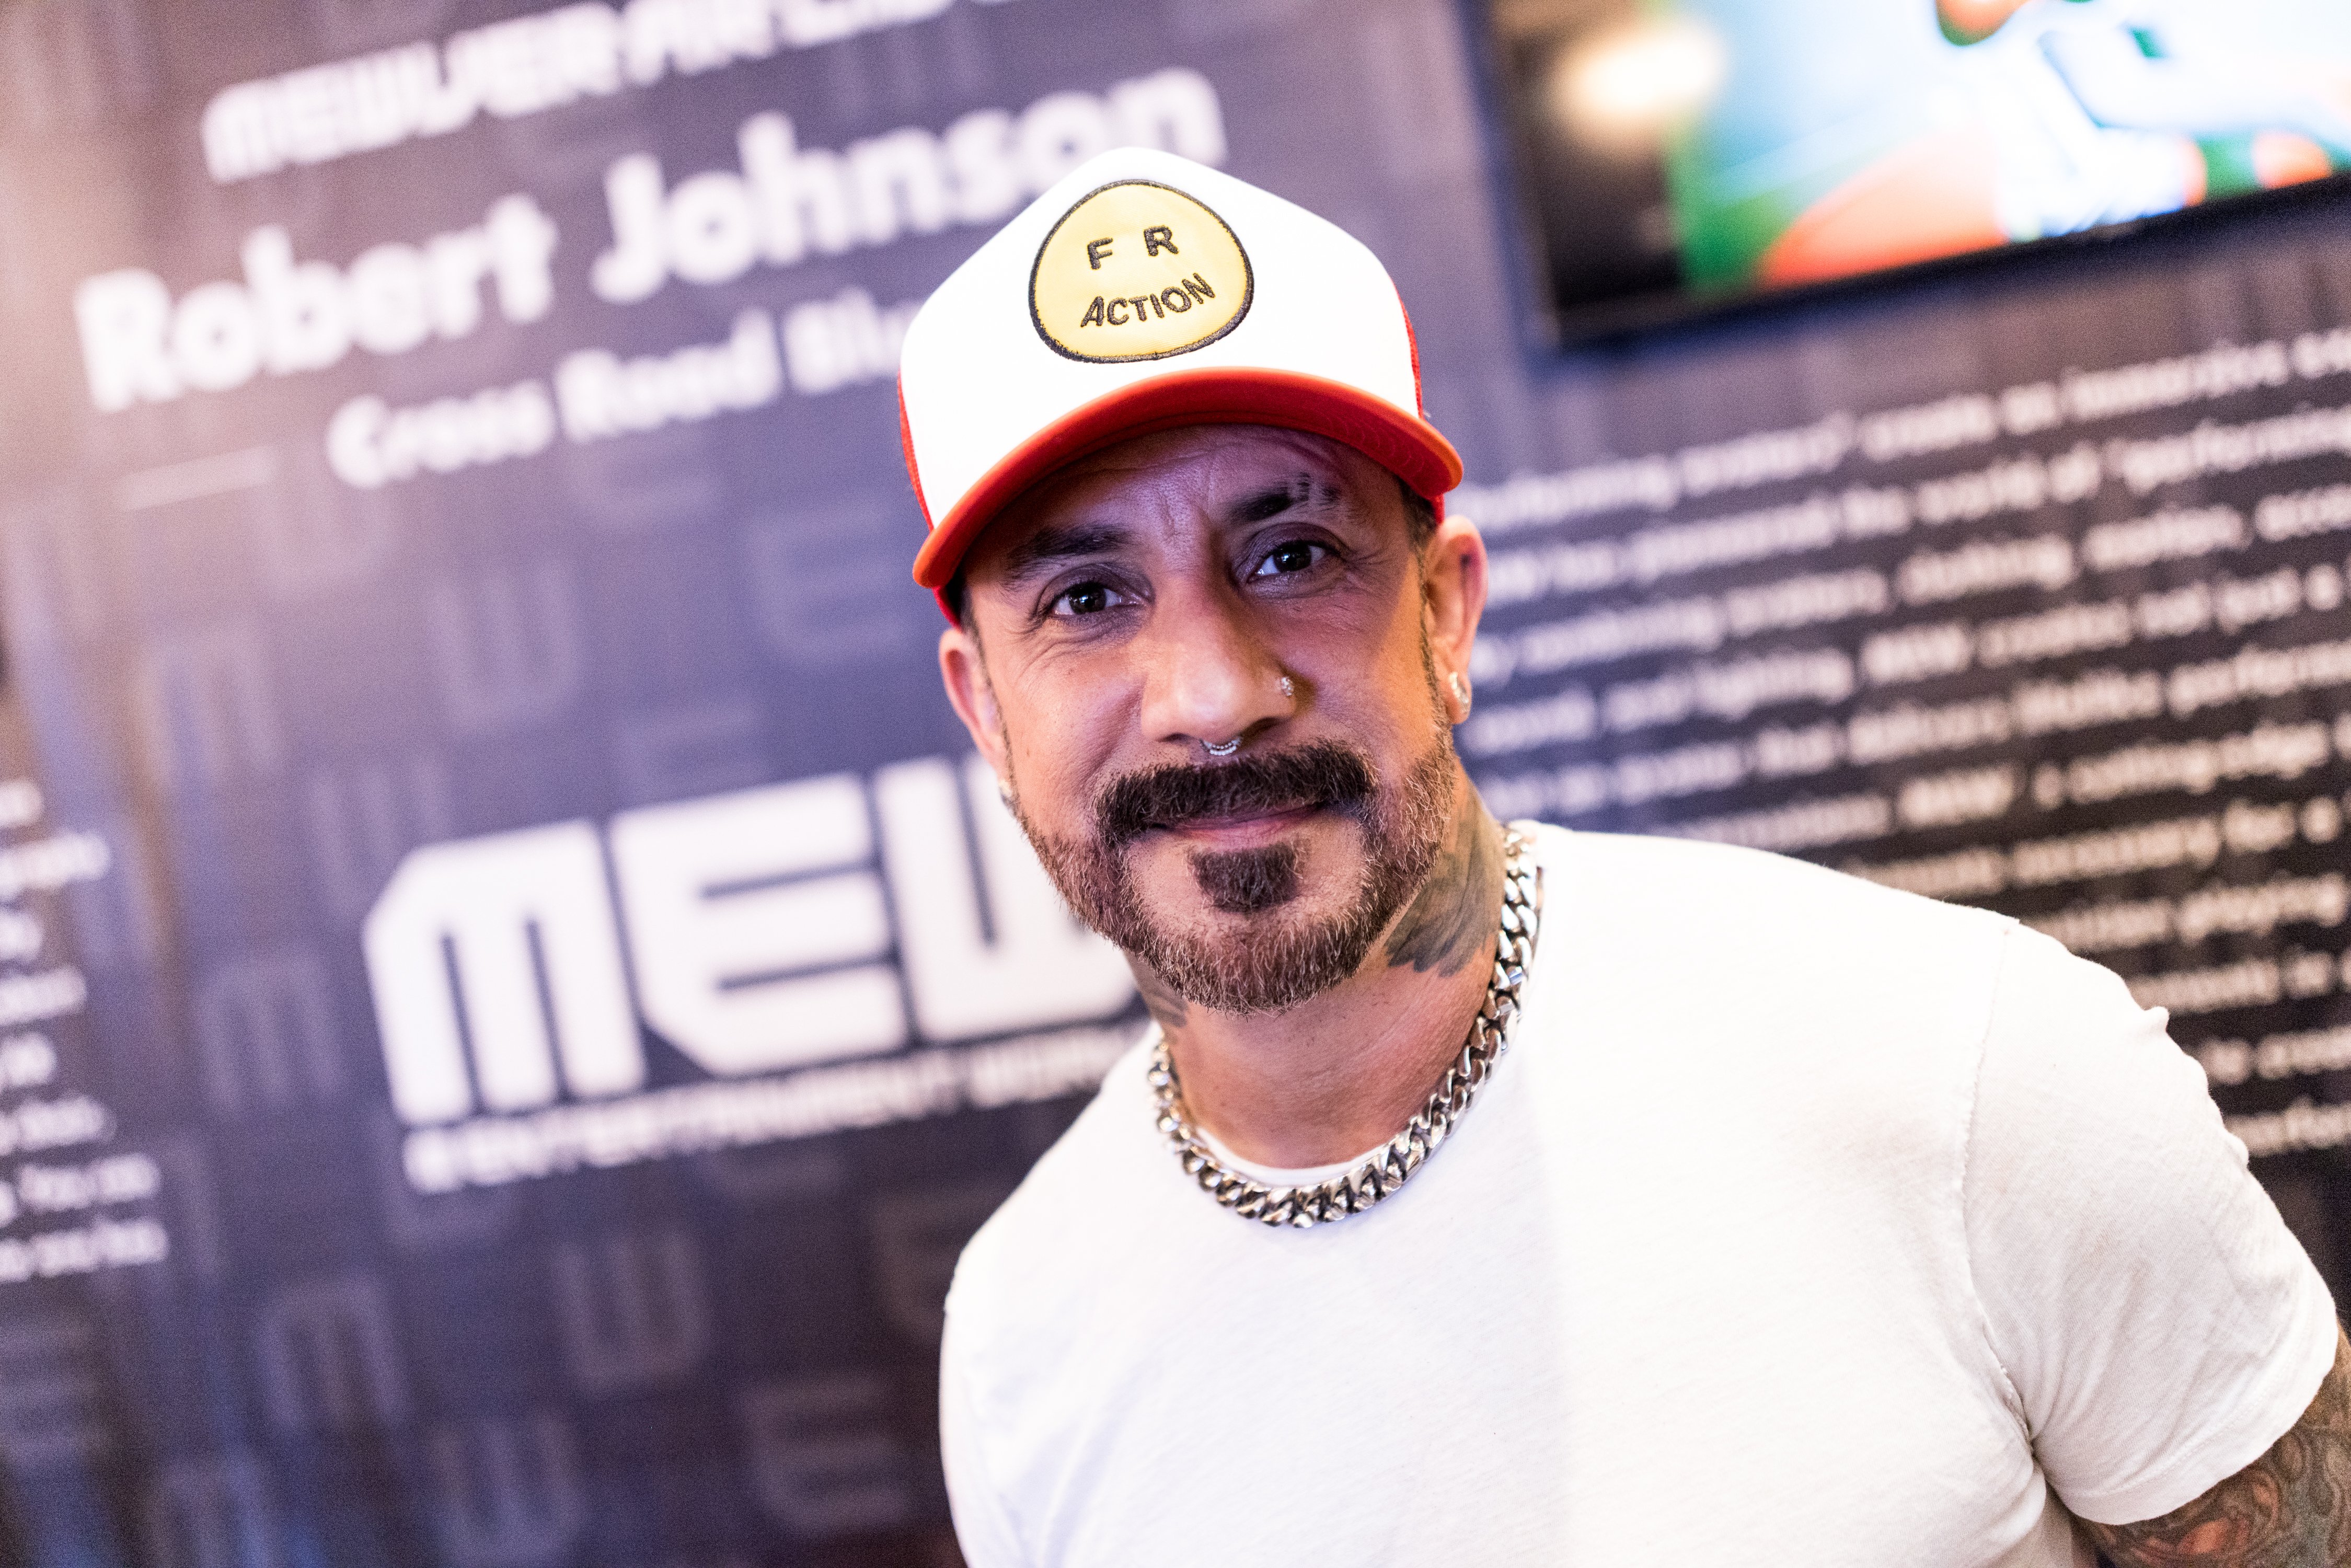 Backstreet Boys bandmember AJ Mclean attends the official gift lounge presented by Míage Skincare